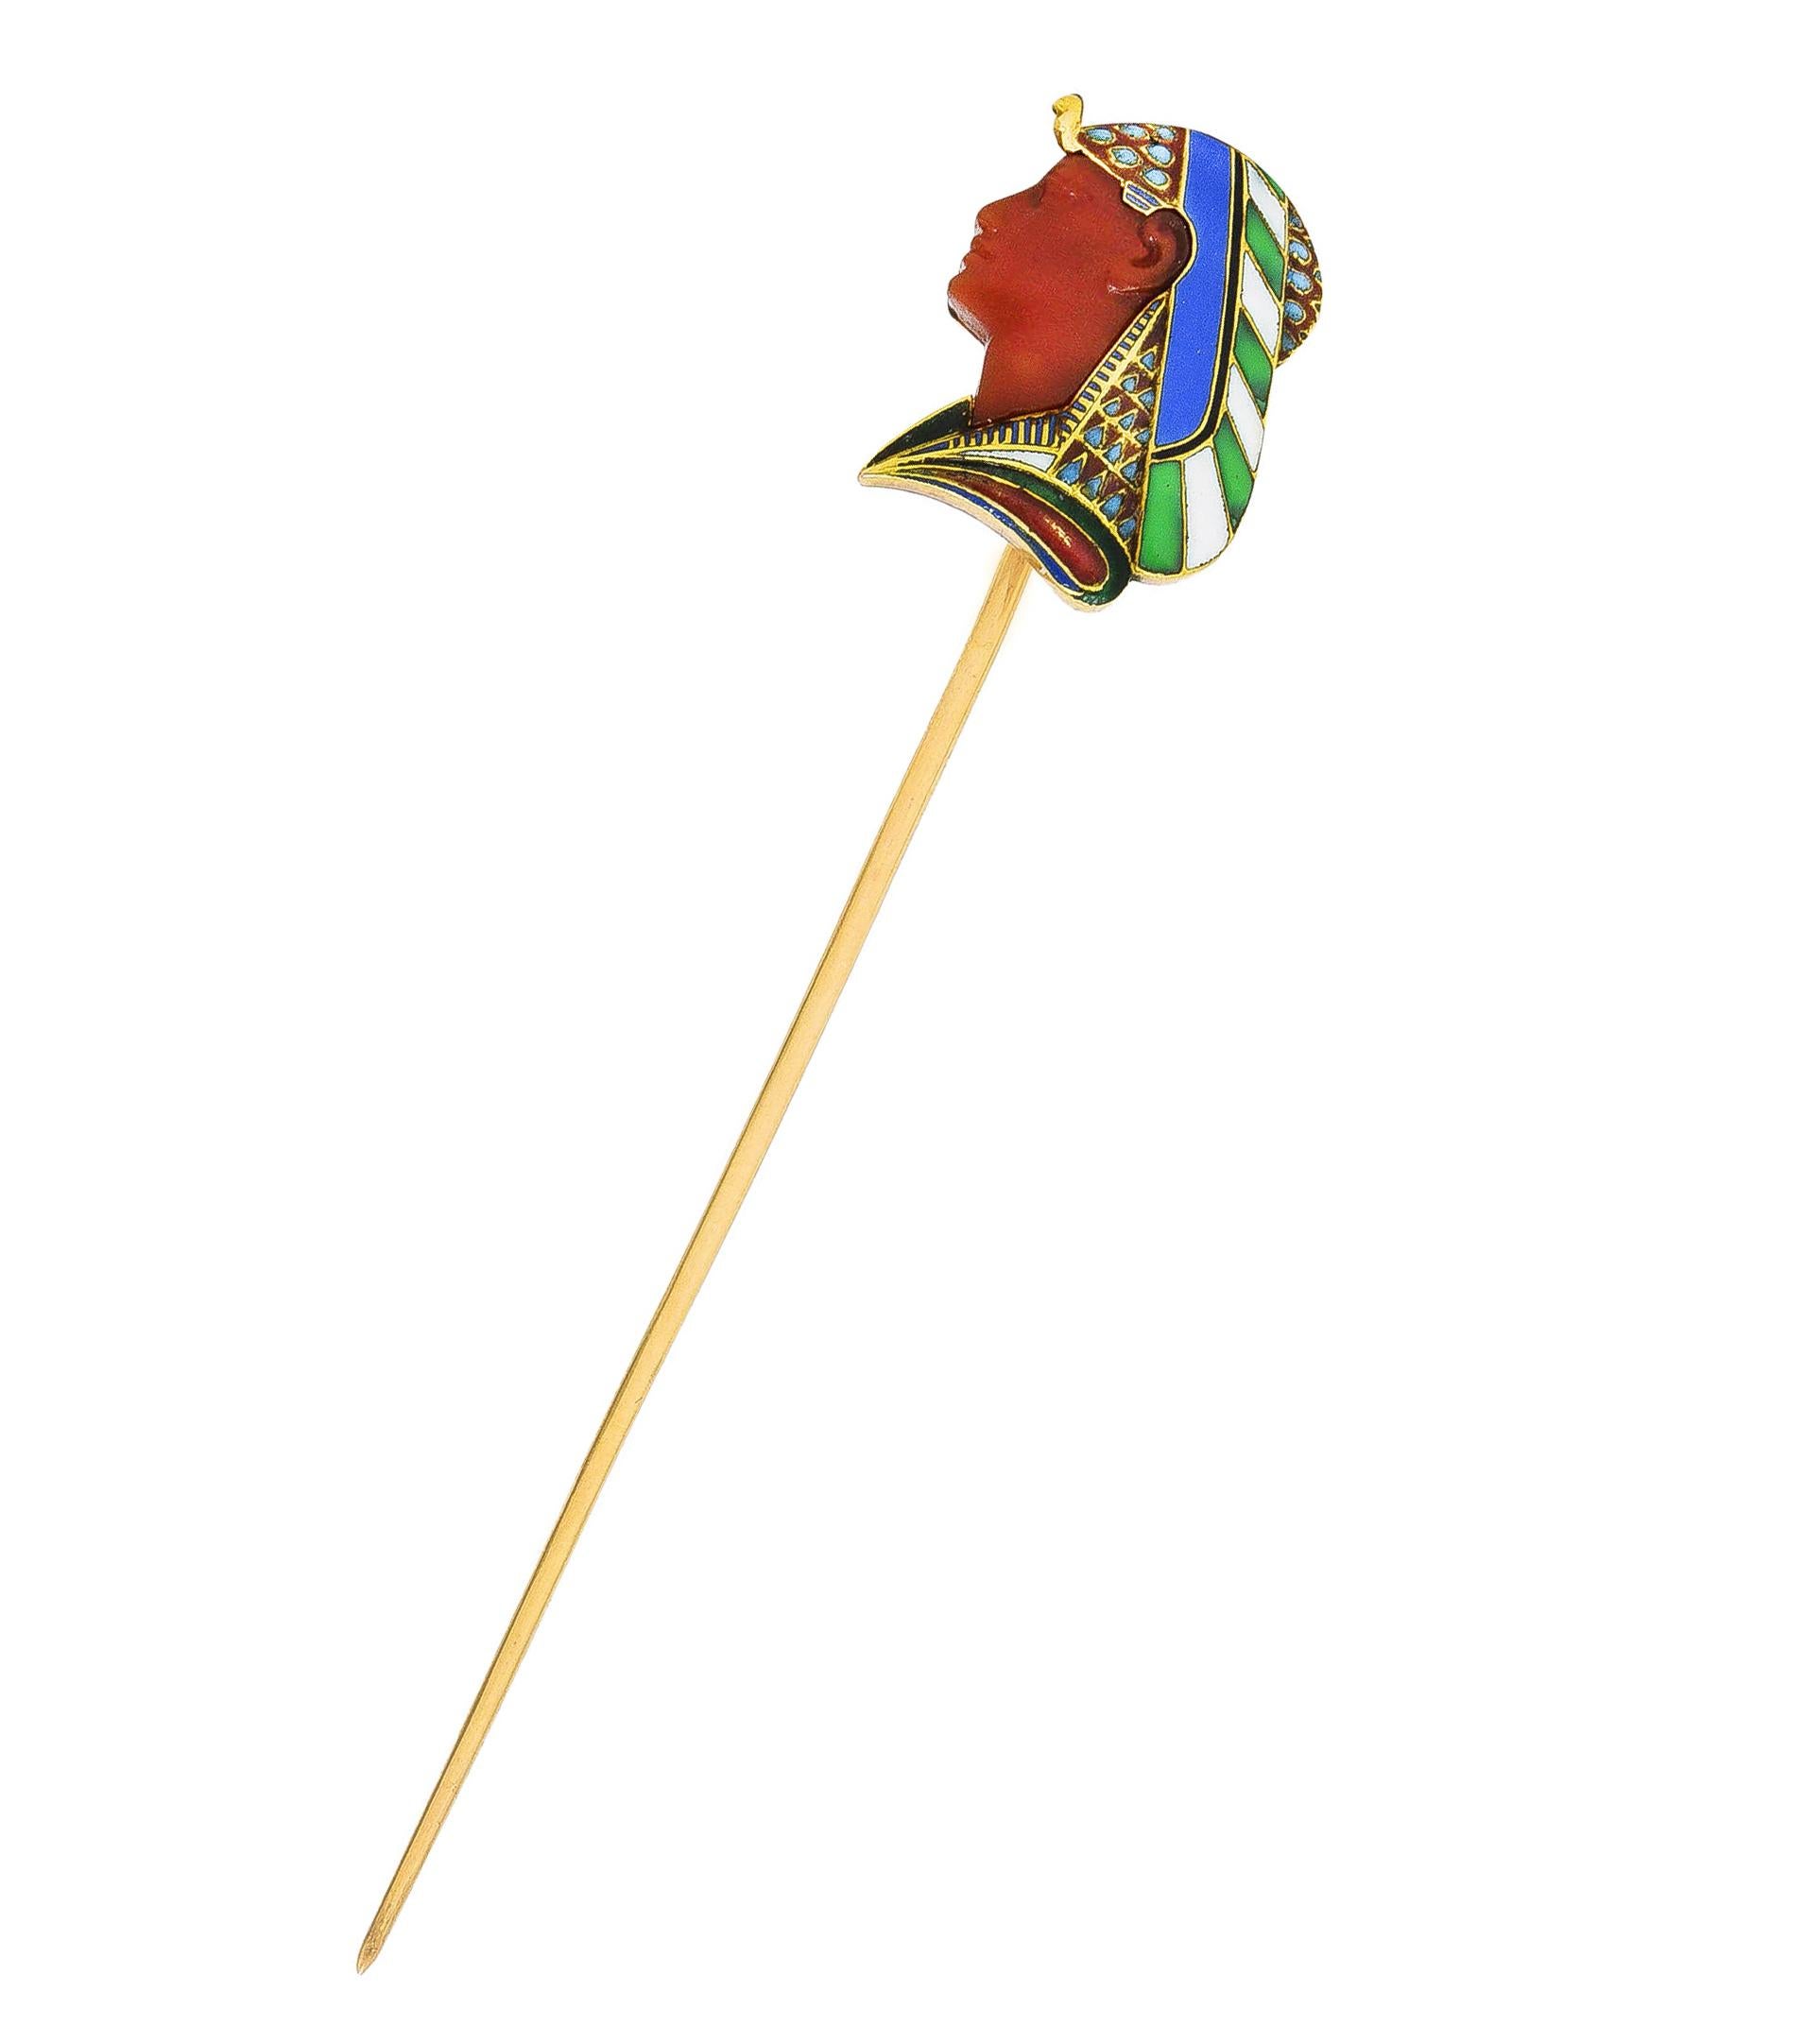 Stickpin is designed as the profiled bust of a pharaoh wearing a decorative headdress. Featuring enamel detailing - opaque blue, green, white, red, and black - minimal loss. With a carved carnelian face - translucent reddish orange with matte